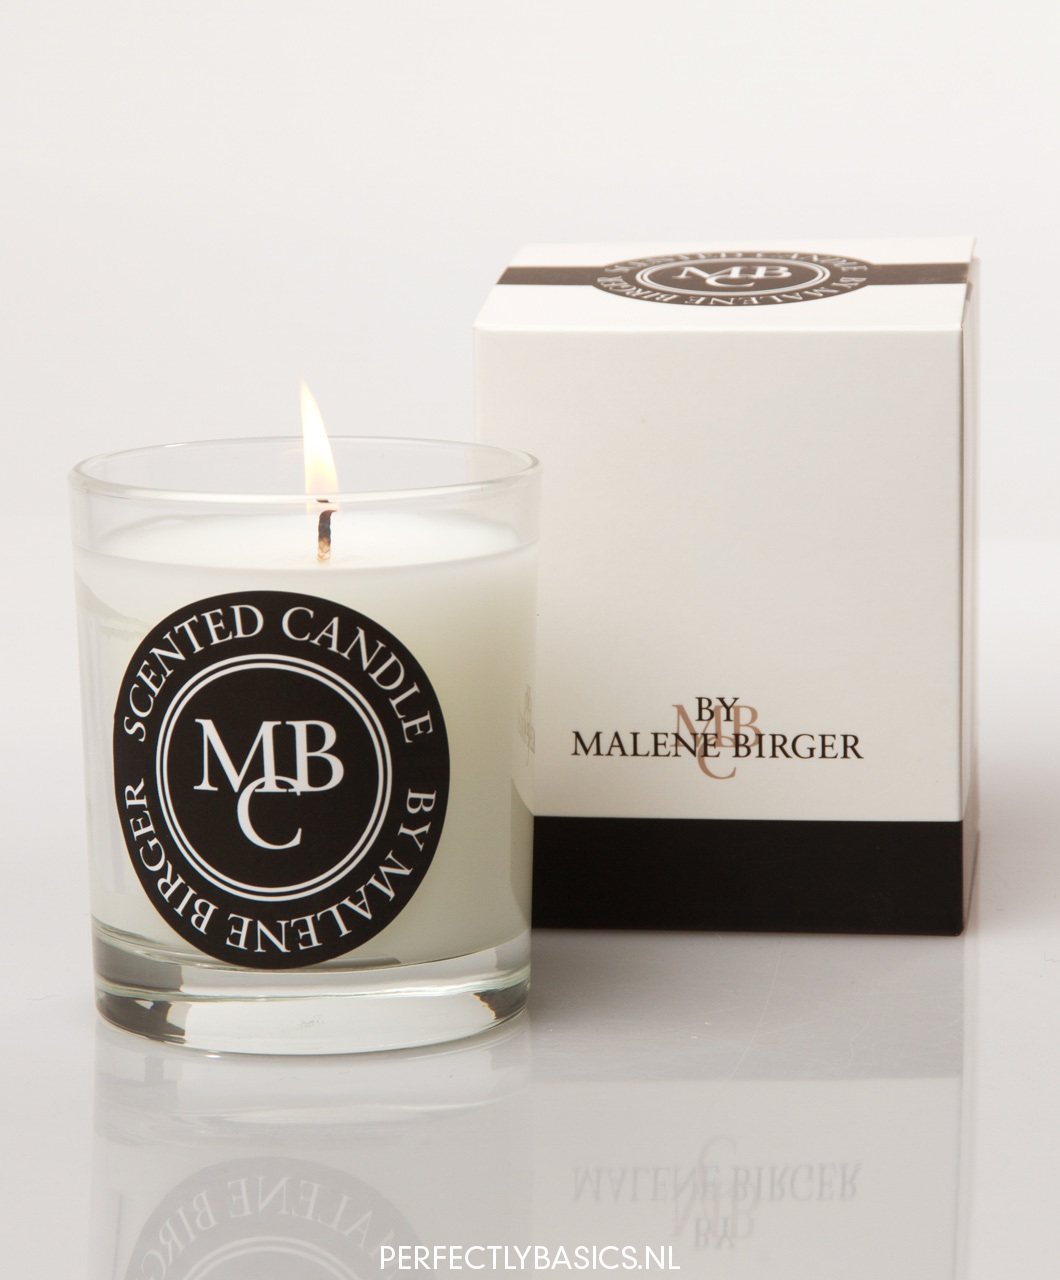 By Malene Birger Scented Candle Milk & Honey 